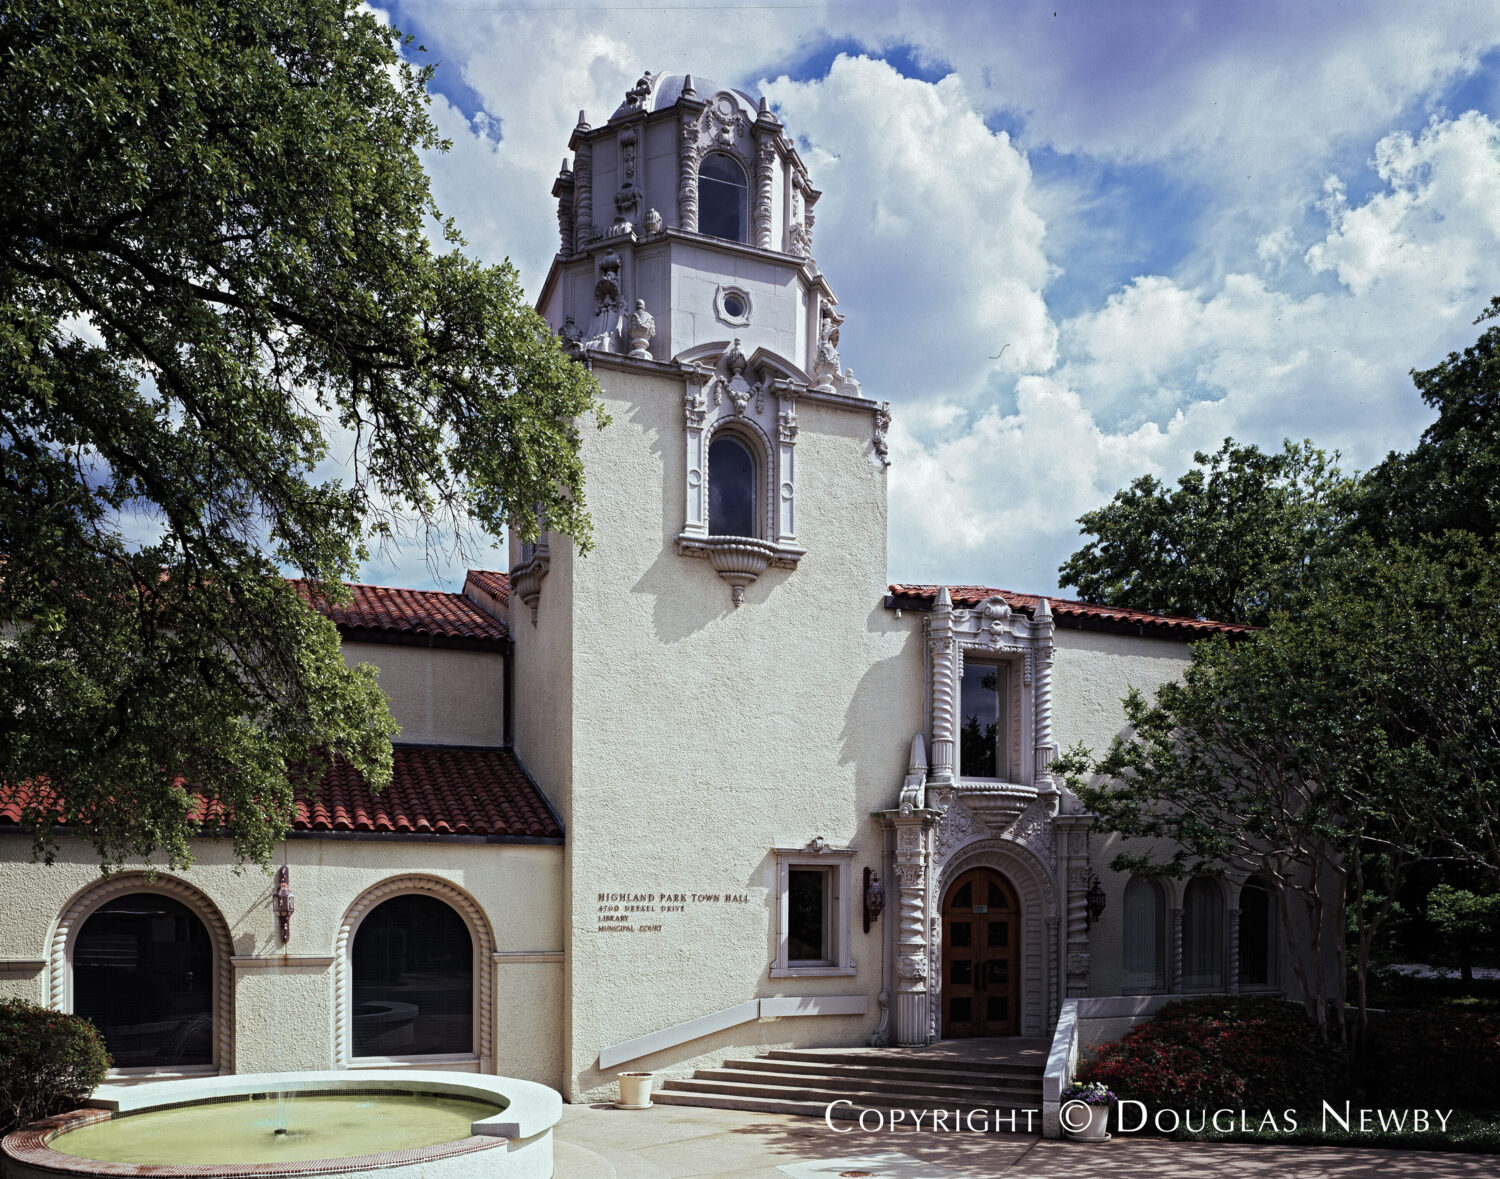 Architect designed townhall found in Highland Park, Texas
